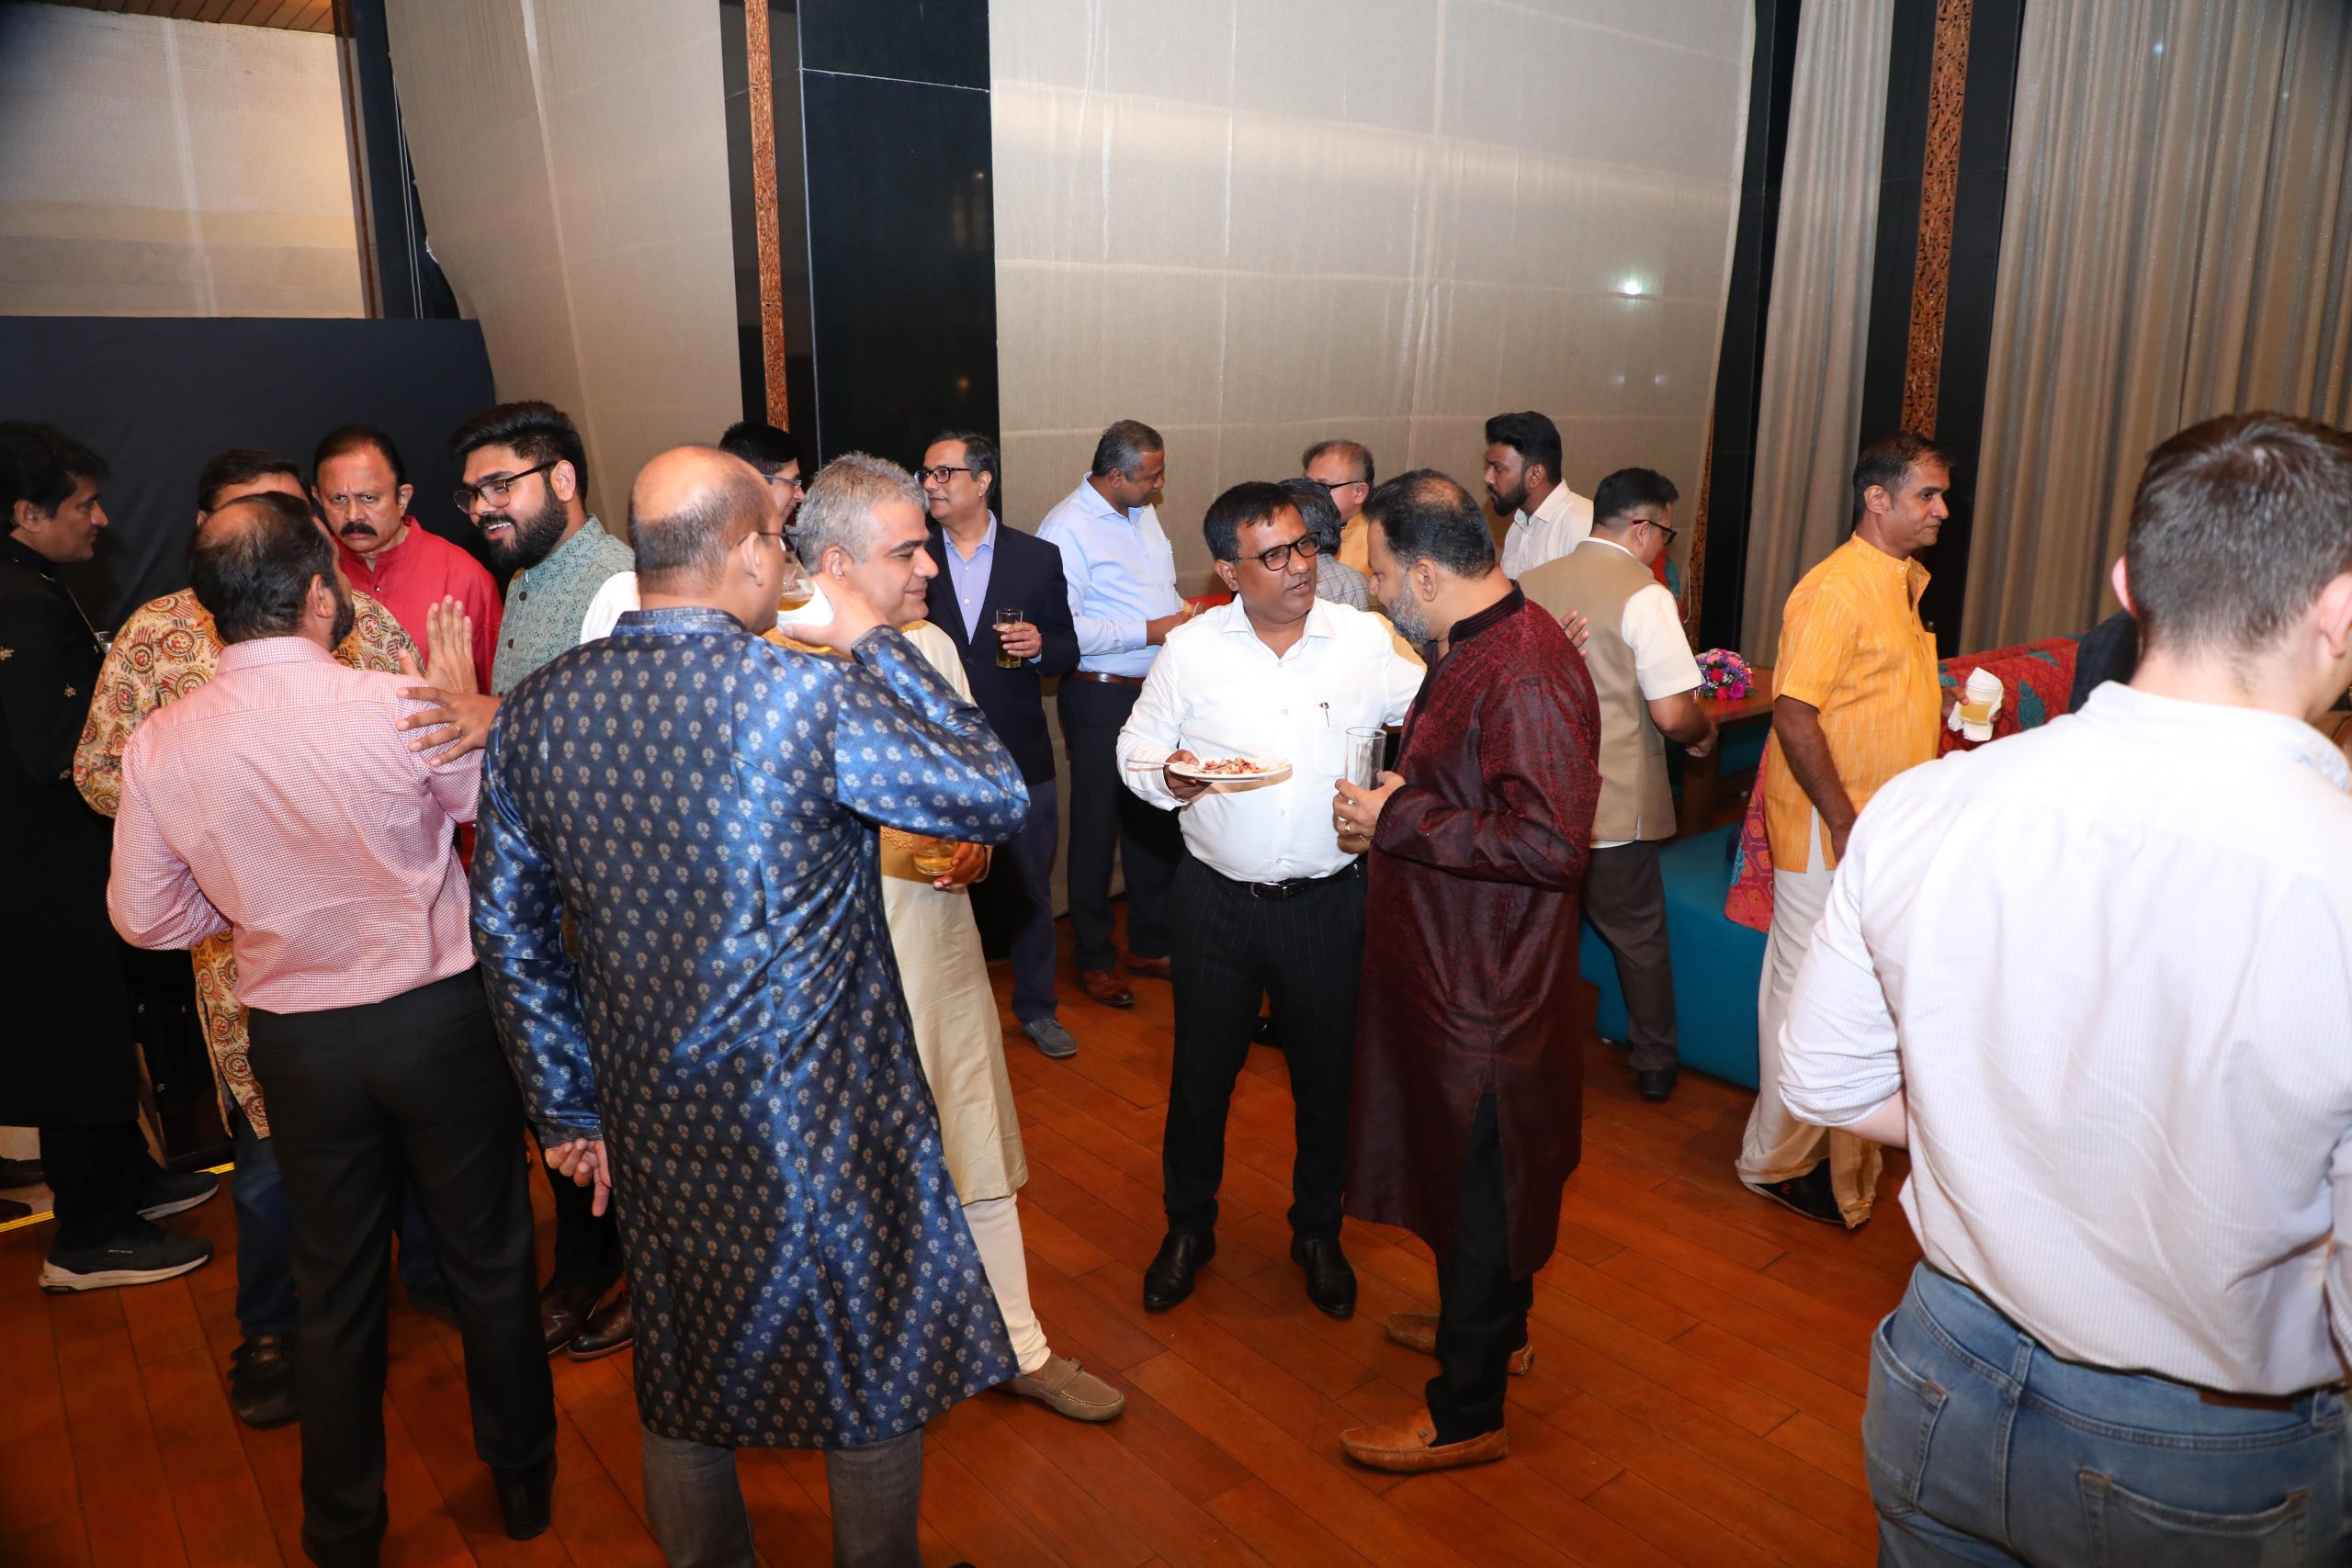 Members at our recent Networking Meet